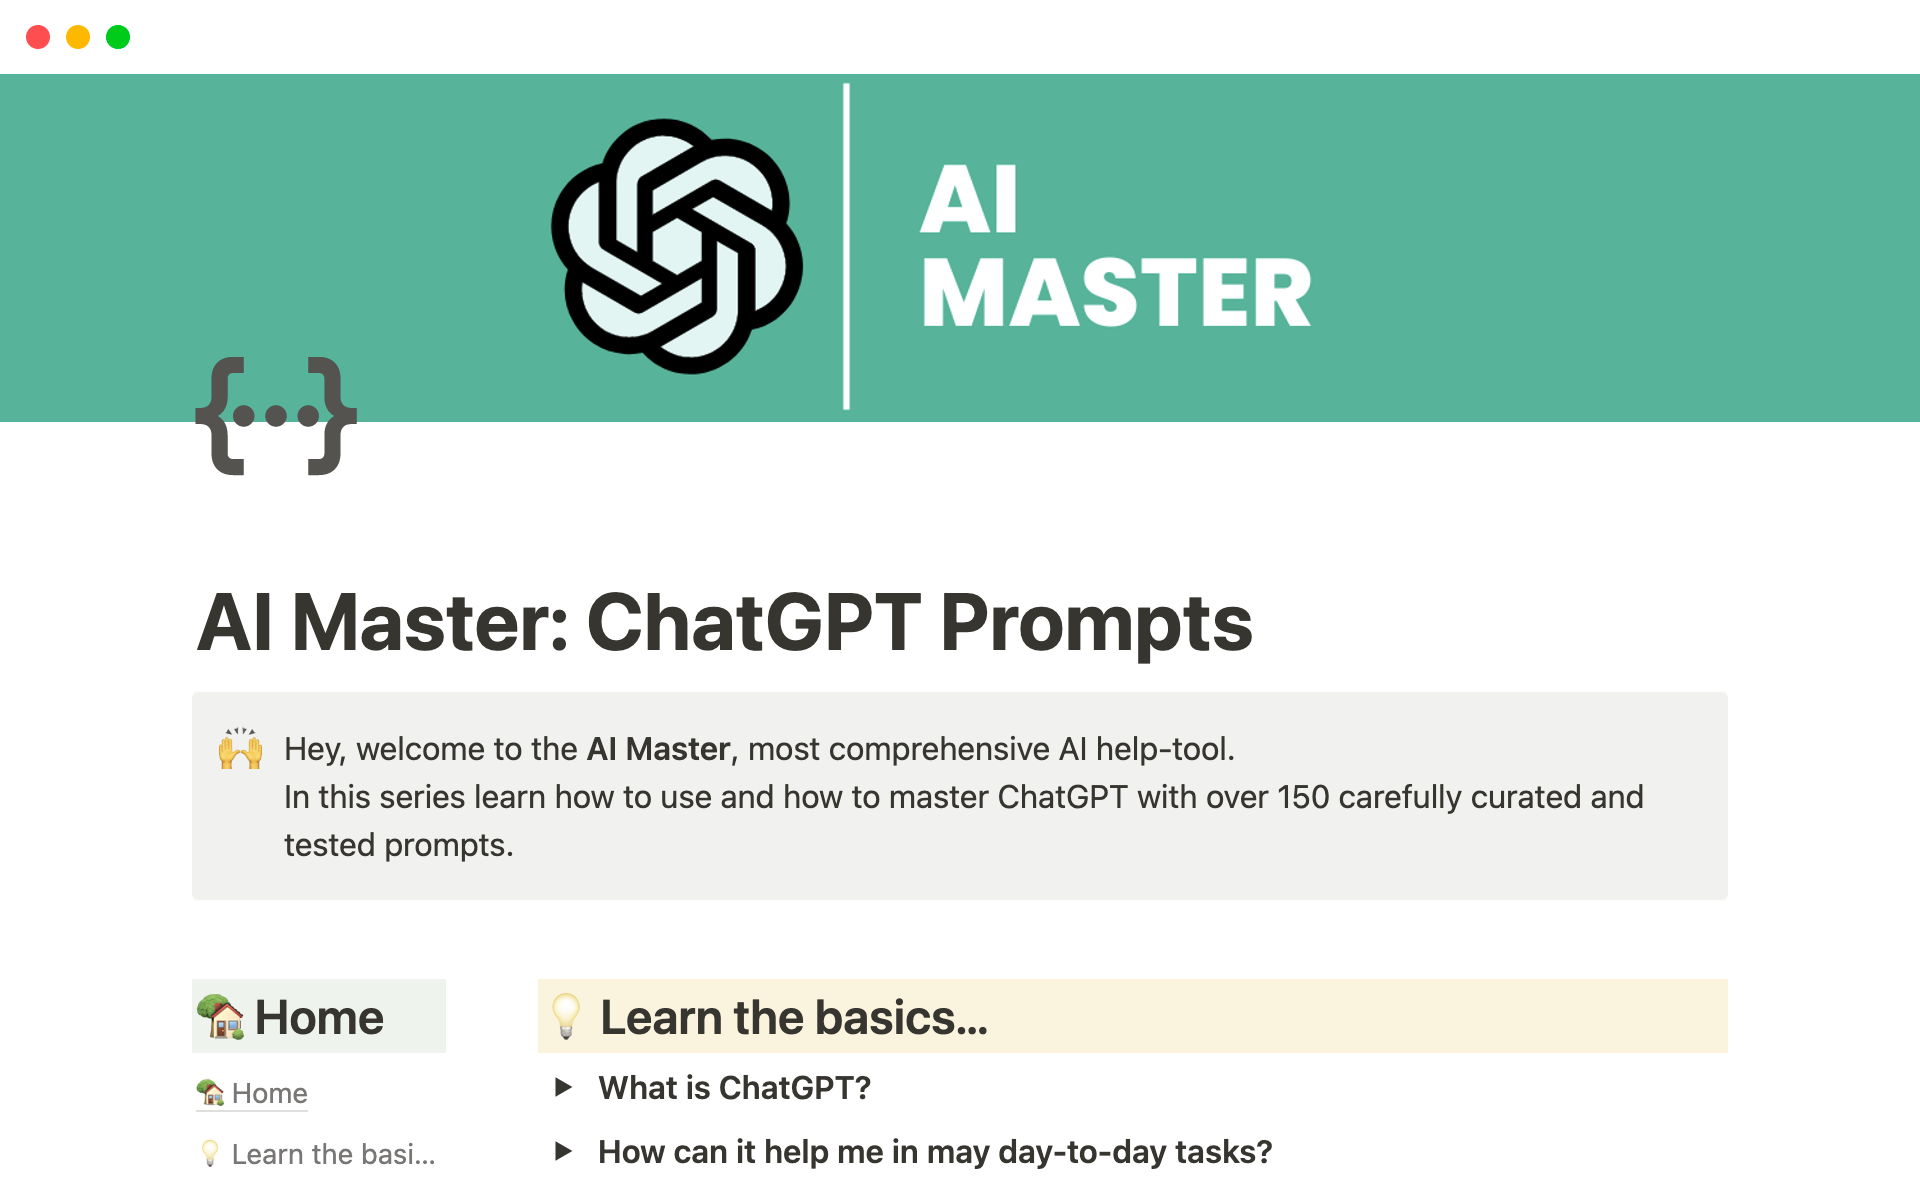 Collection of 200+ ChatGPT prompts, ultimate Guide to AI-Powered Productivity, Education, and Entertainment!